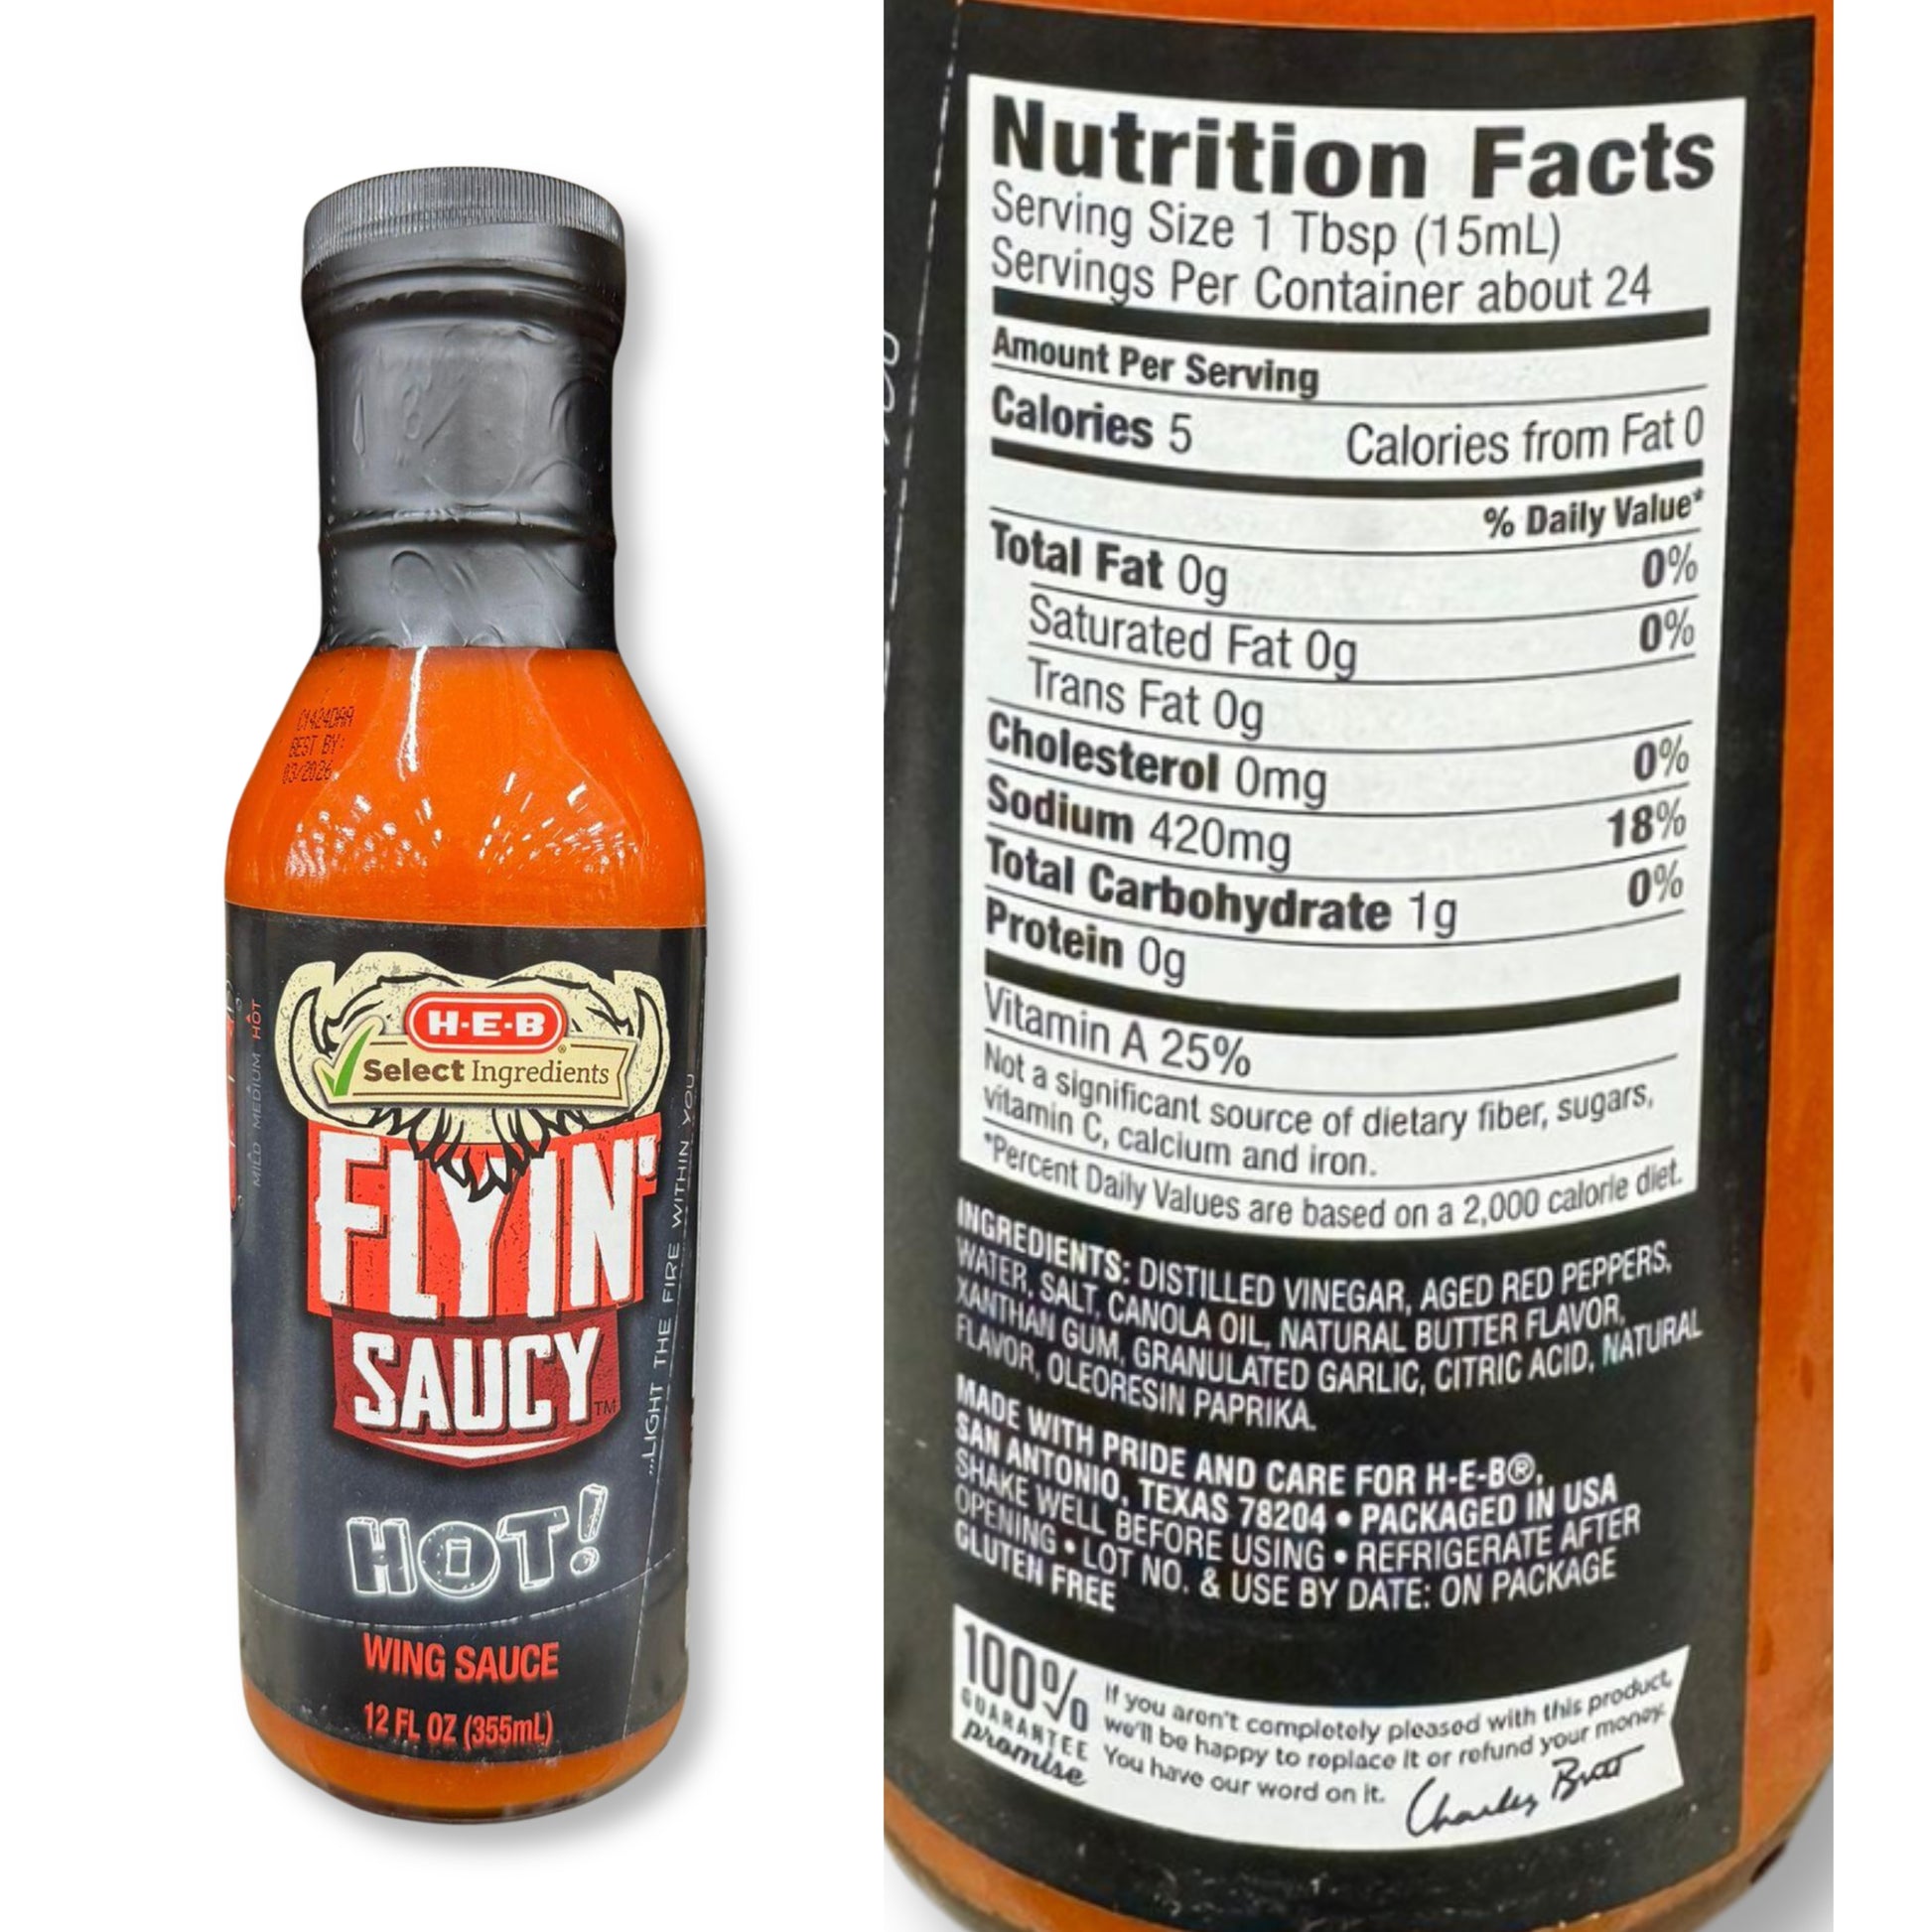 HEB Flyin' Saucy Wing Sauce h-e-b texas sauces hot heat wing sauces condiments